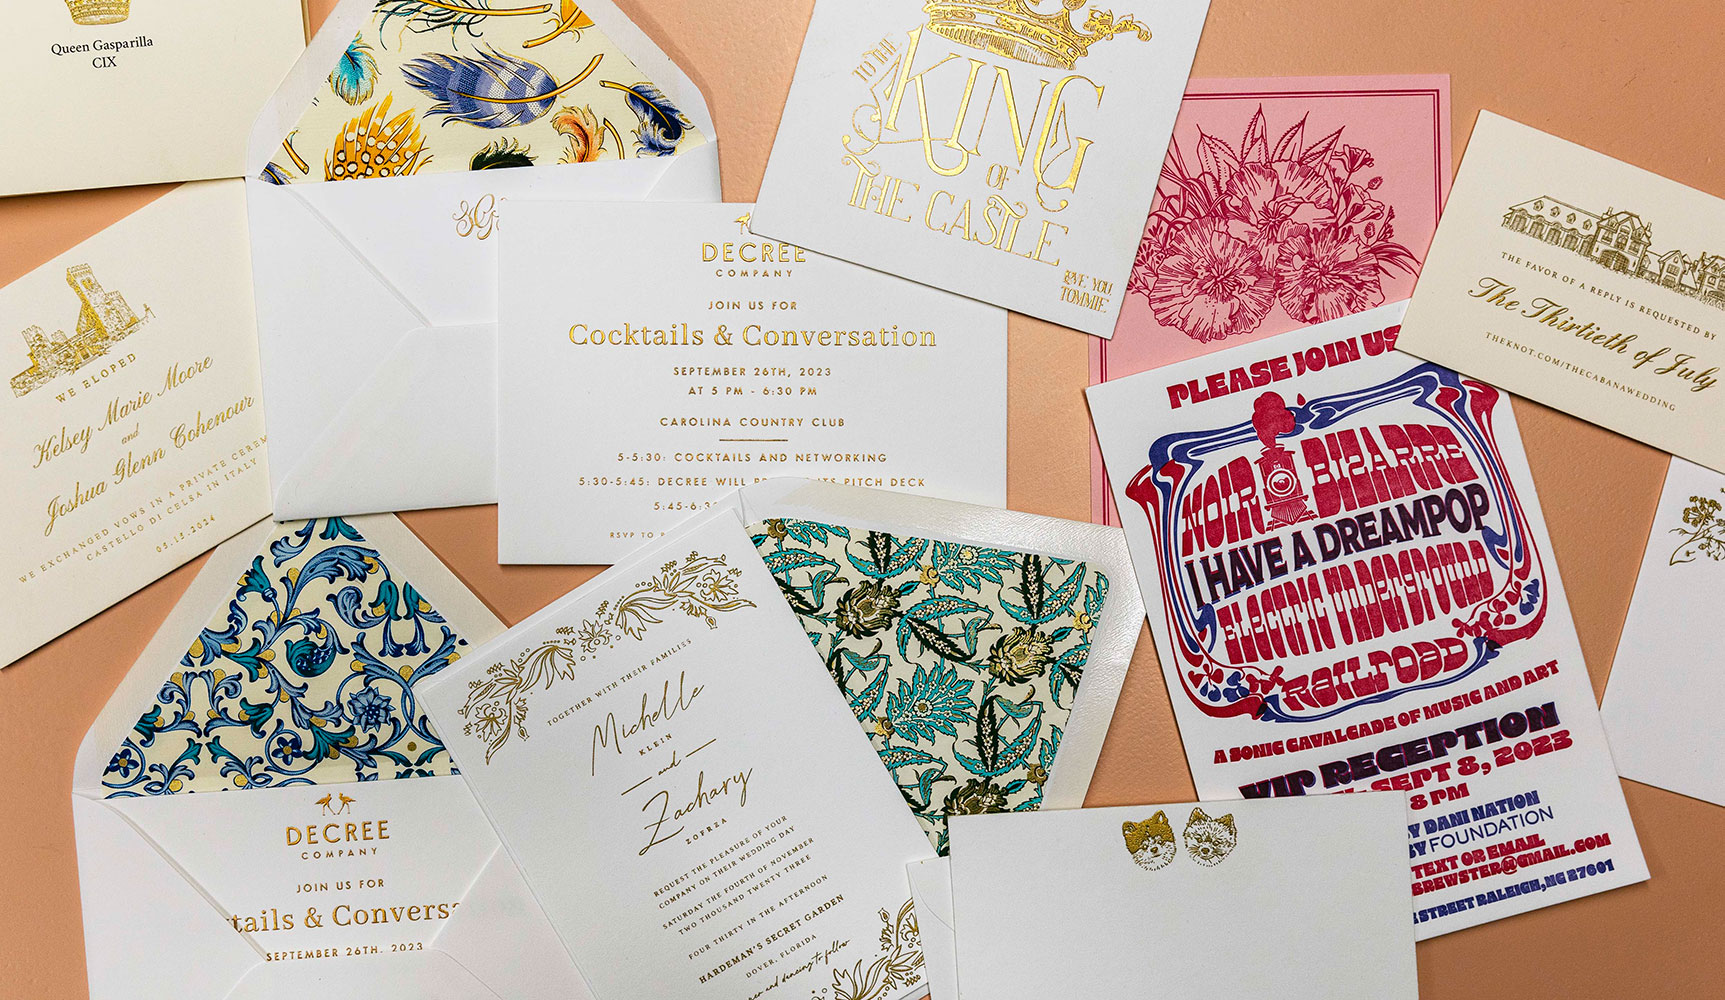 Bespoke stationery is designed and created in-house. All of Decree’s cards have the illustrious raised or pressed-in effect and are printed on 100% cotton paper of thick stock.